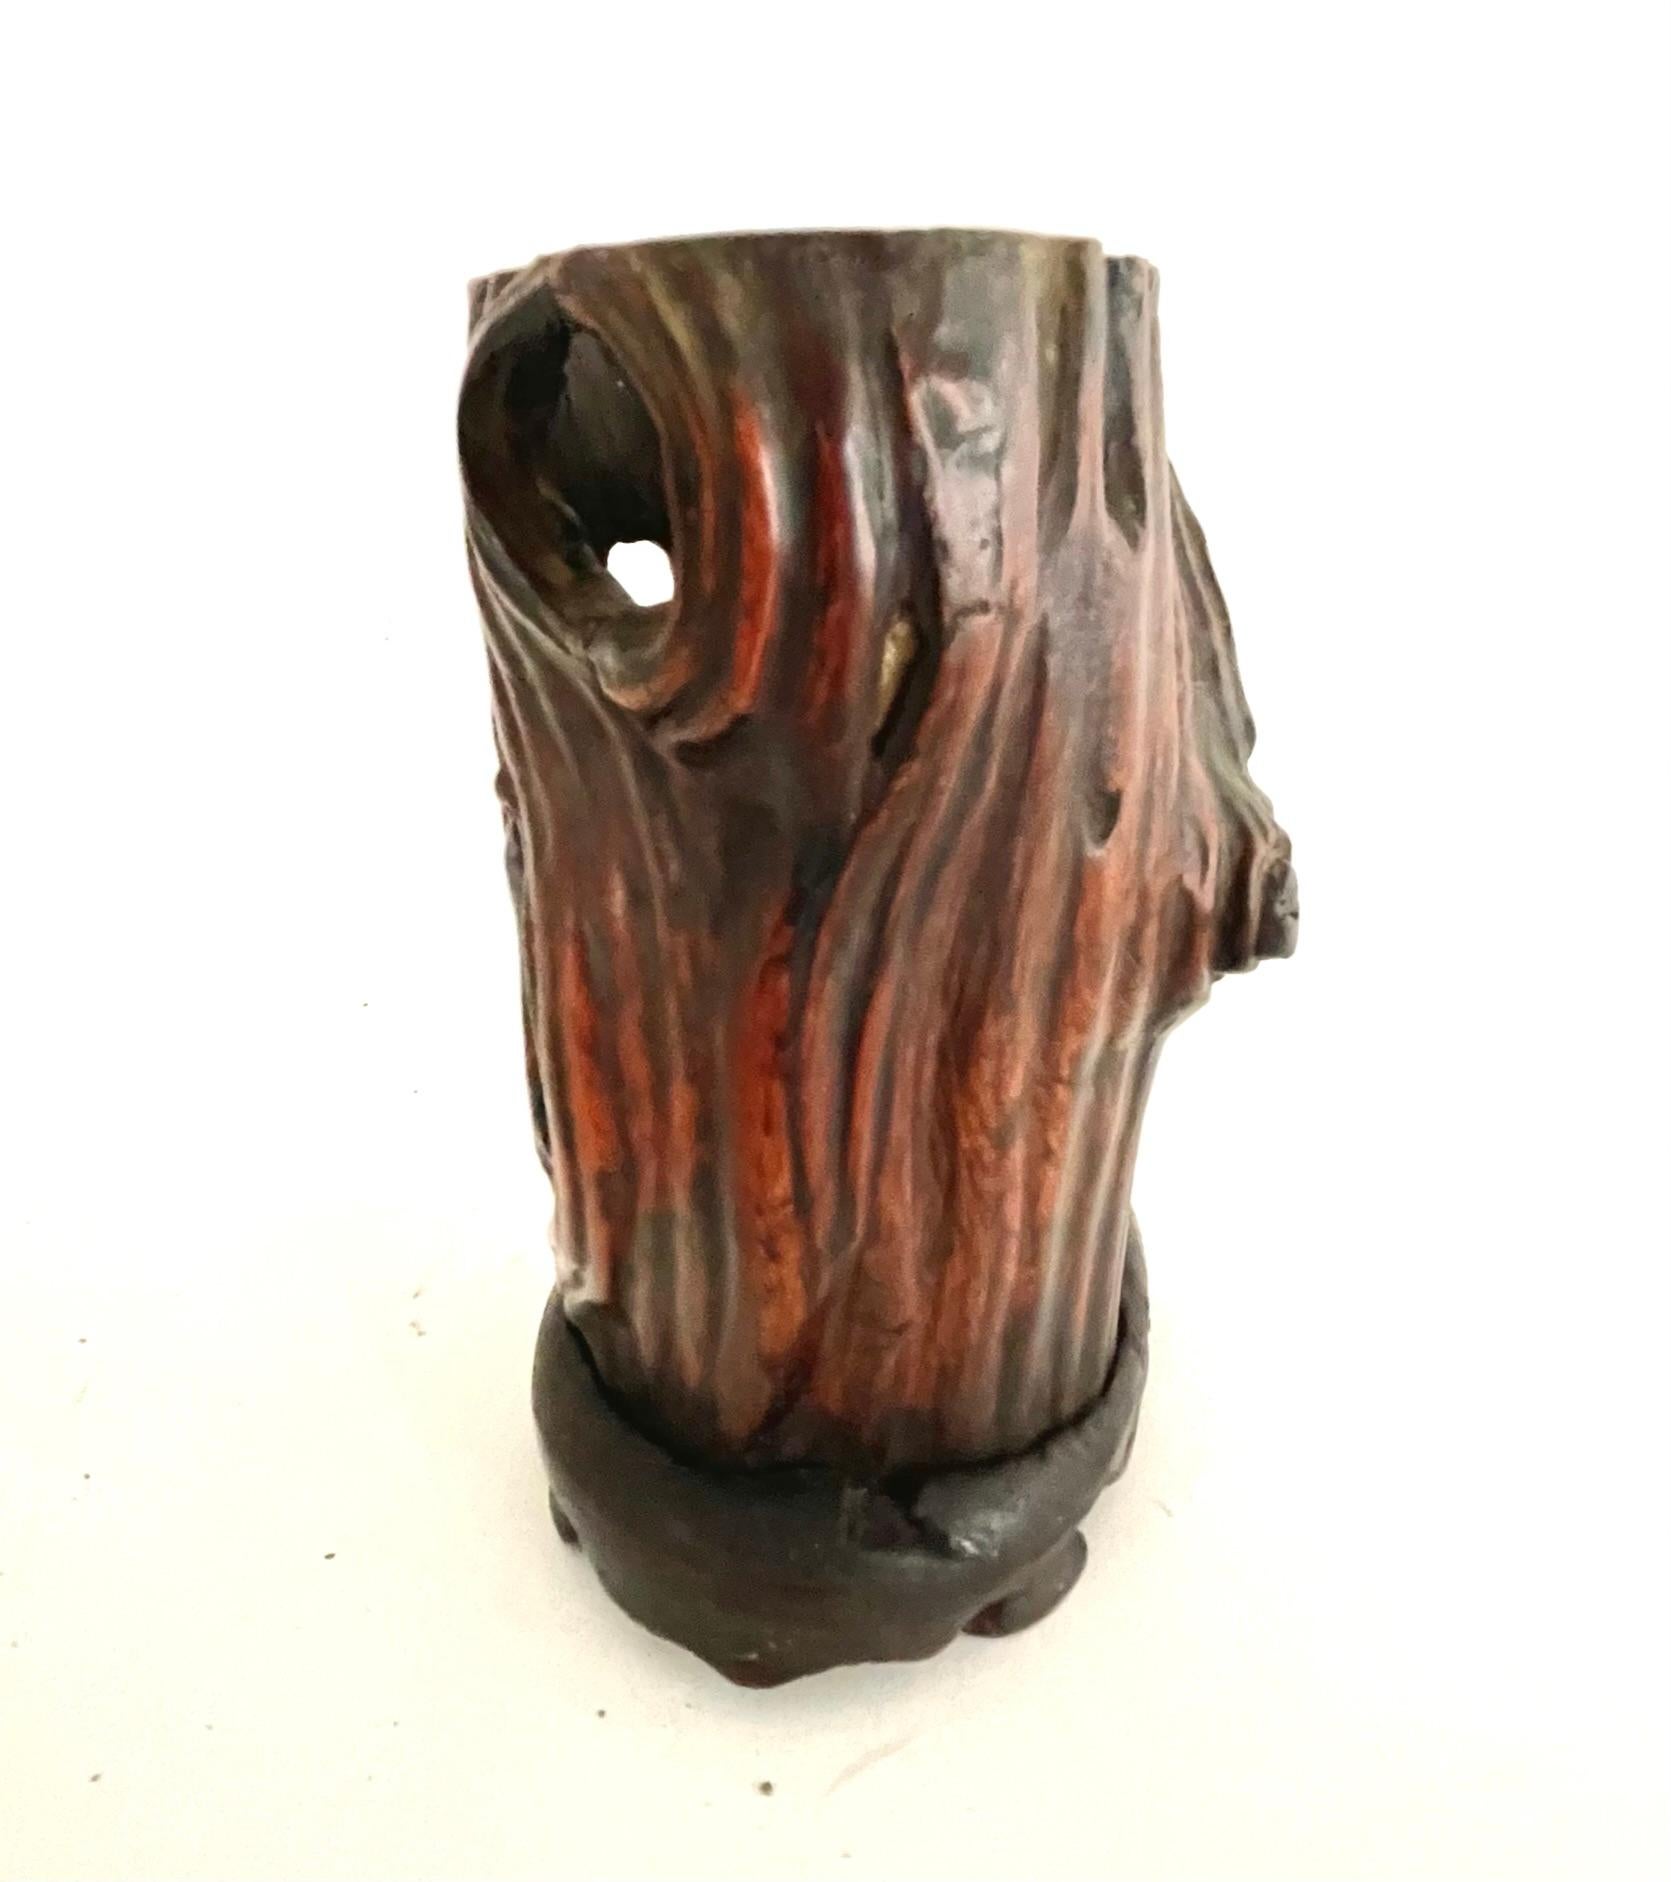 This is a beautiful 19th century Chinese brush pot made from a hardwood root. 
The root brush pot has natural gnarled surface with many knots and indents, the top edge is softly rounded, and the base is finish with a carved stand. 
The graphic